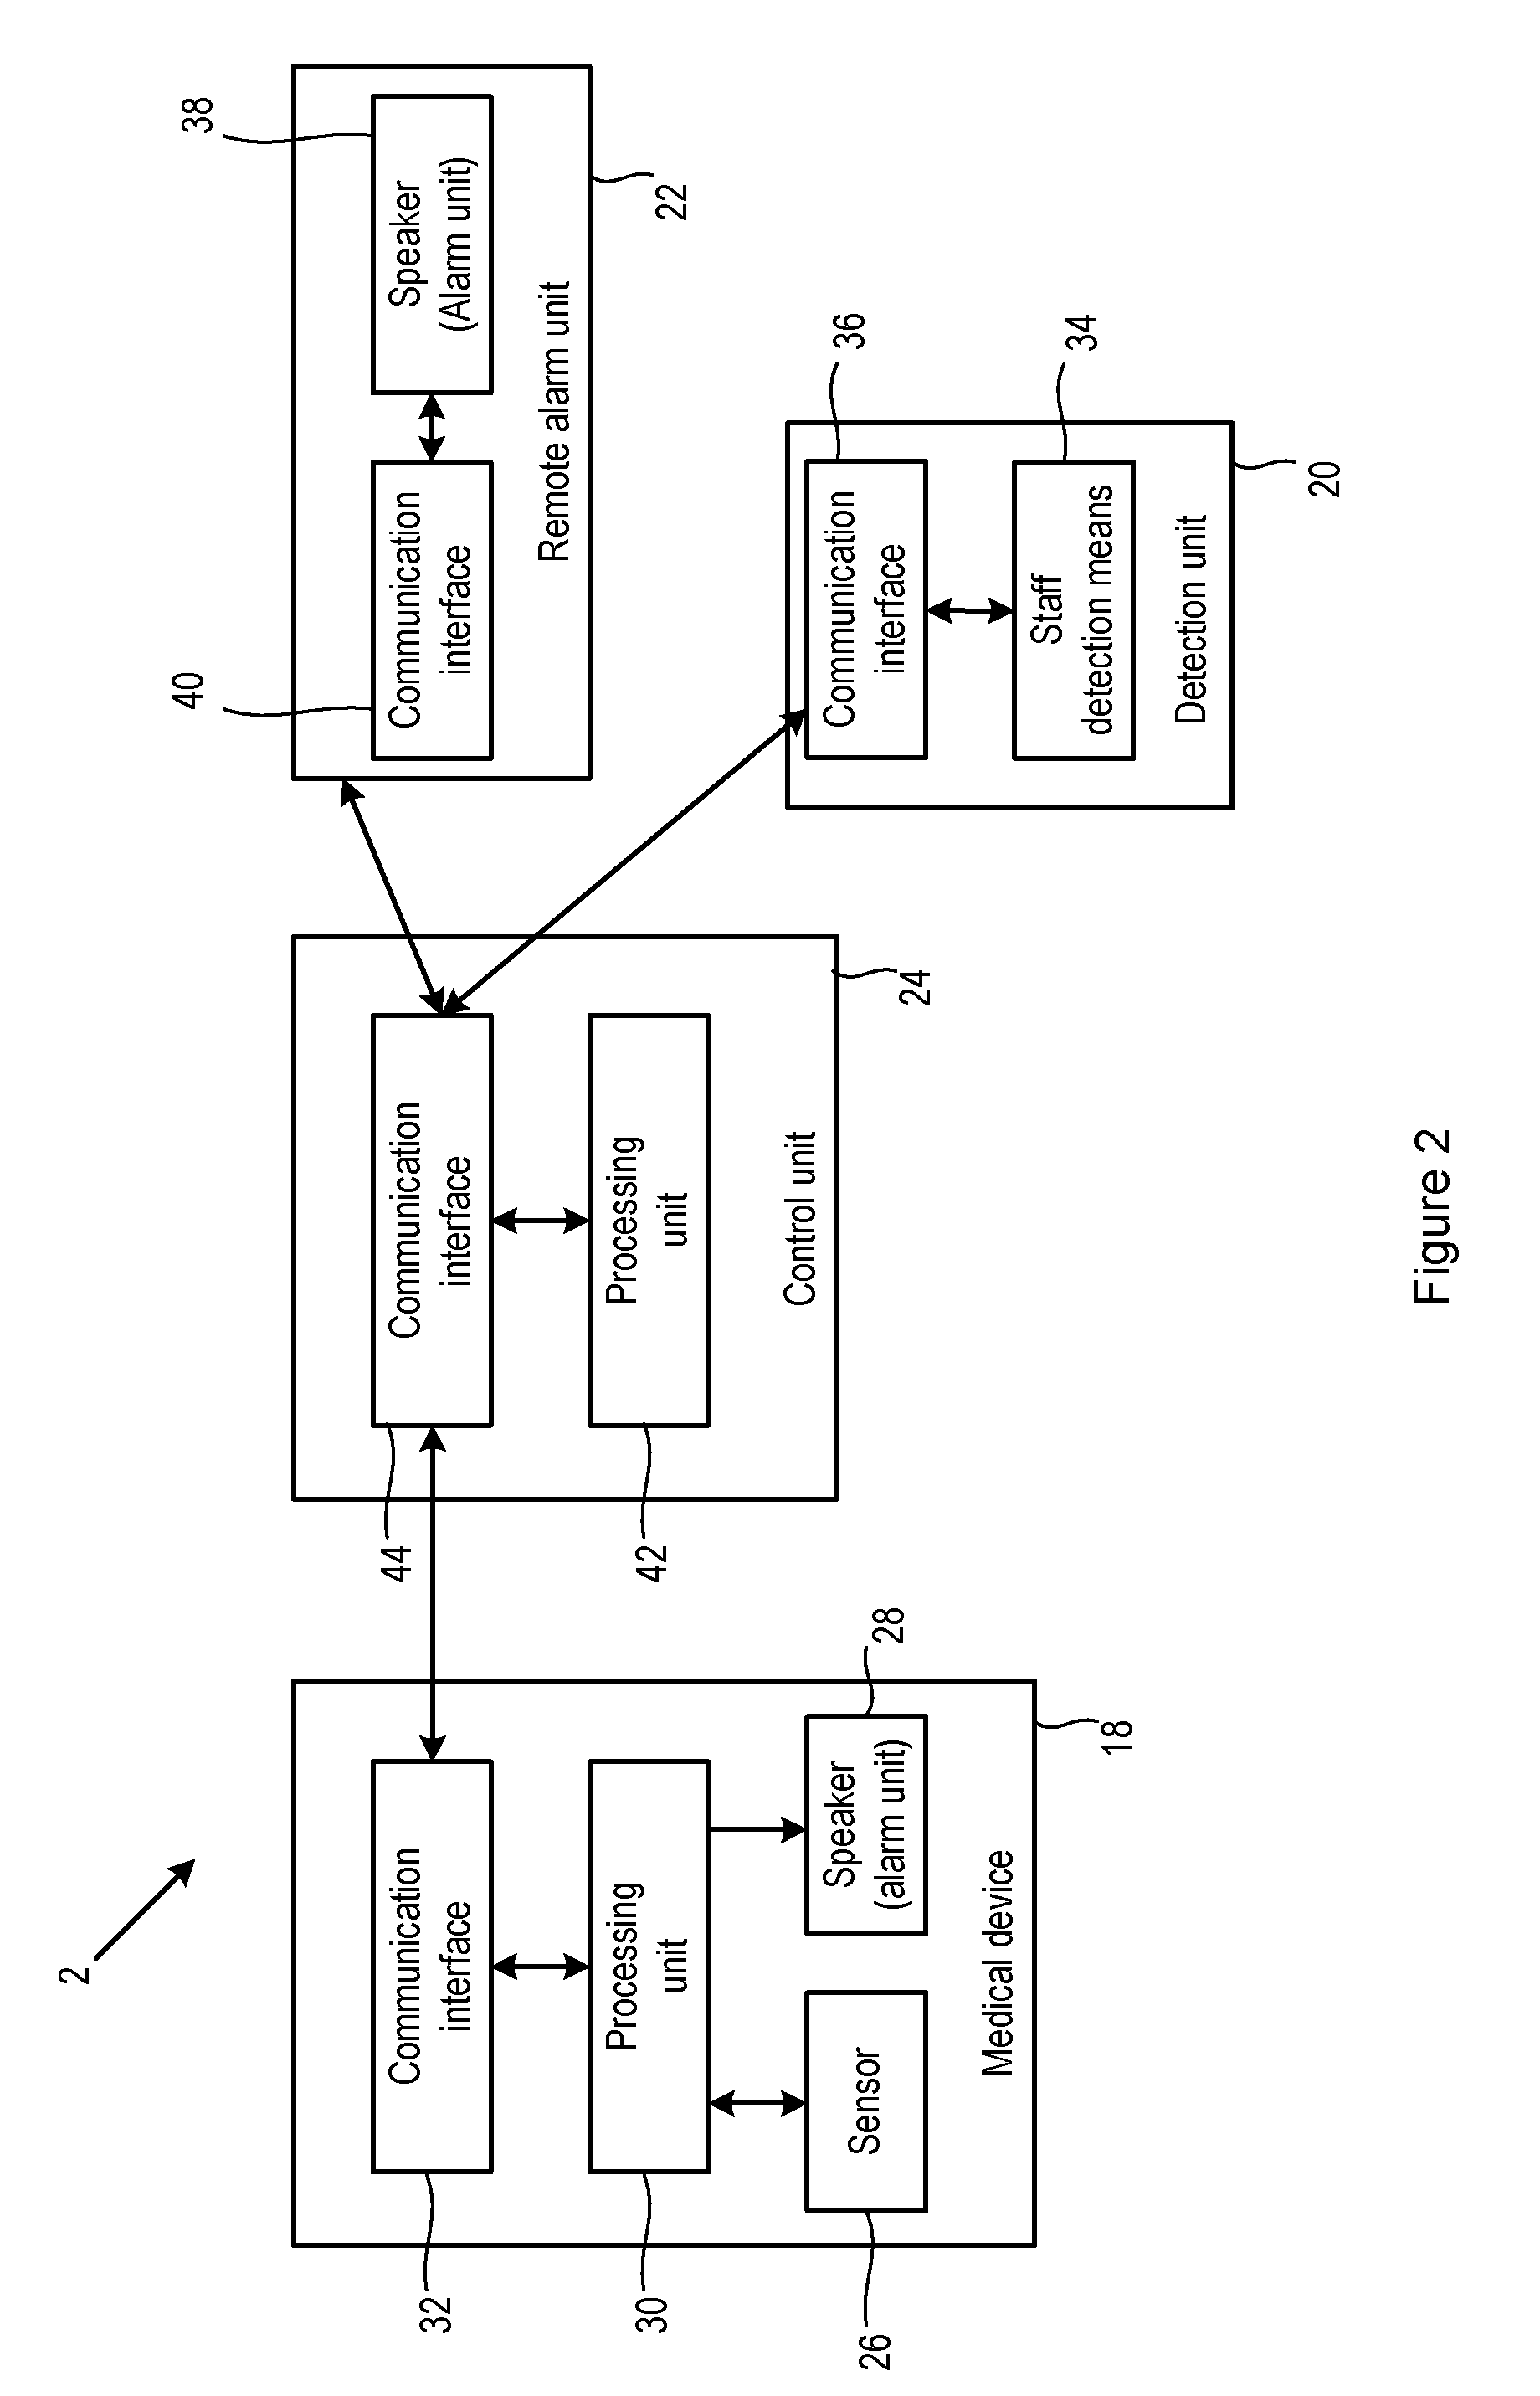 Systems and methods for reducing the impact of alarm sounds on patients